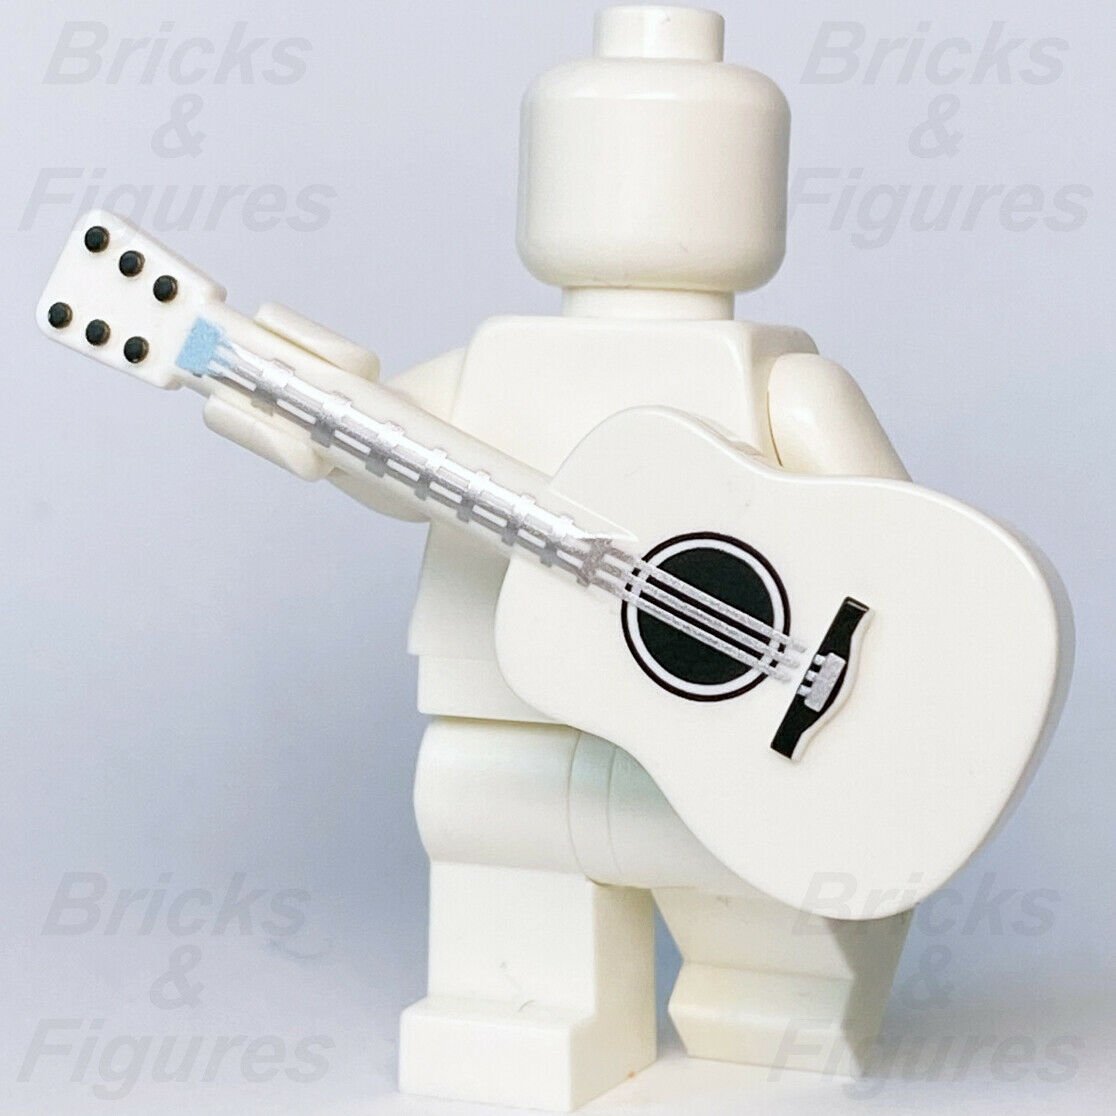 New Ninjago LEGO White Acoustic Guitar with Silver Strings Part 71735